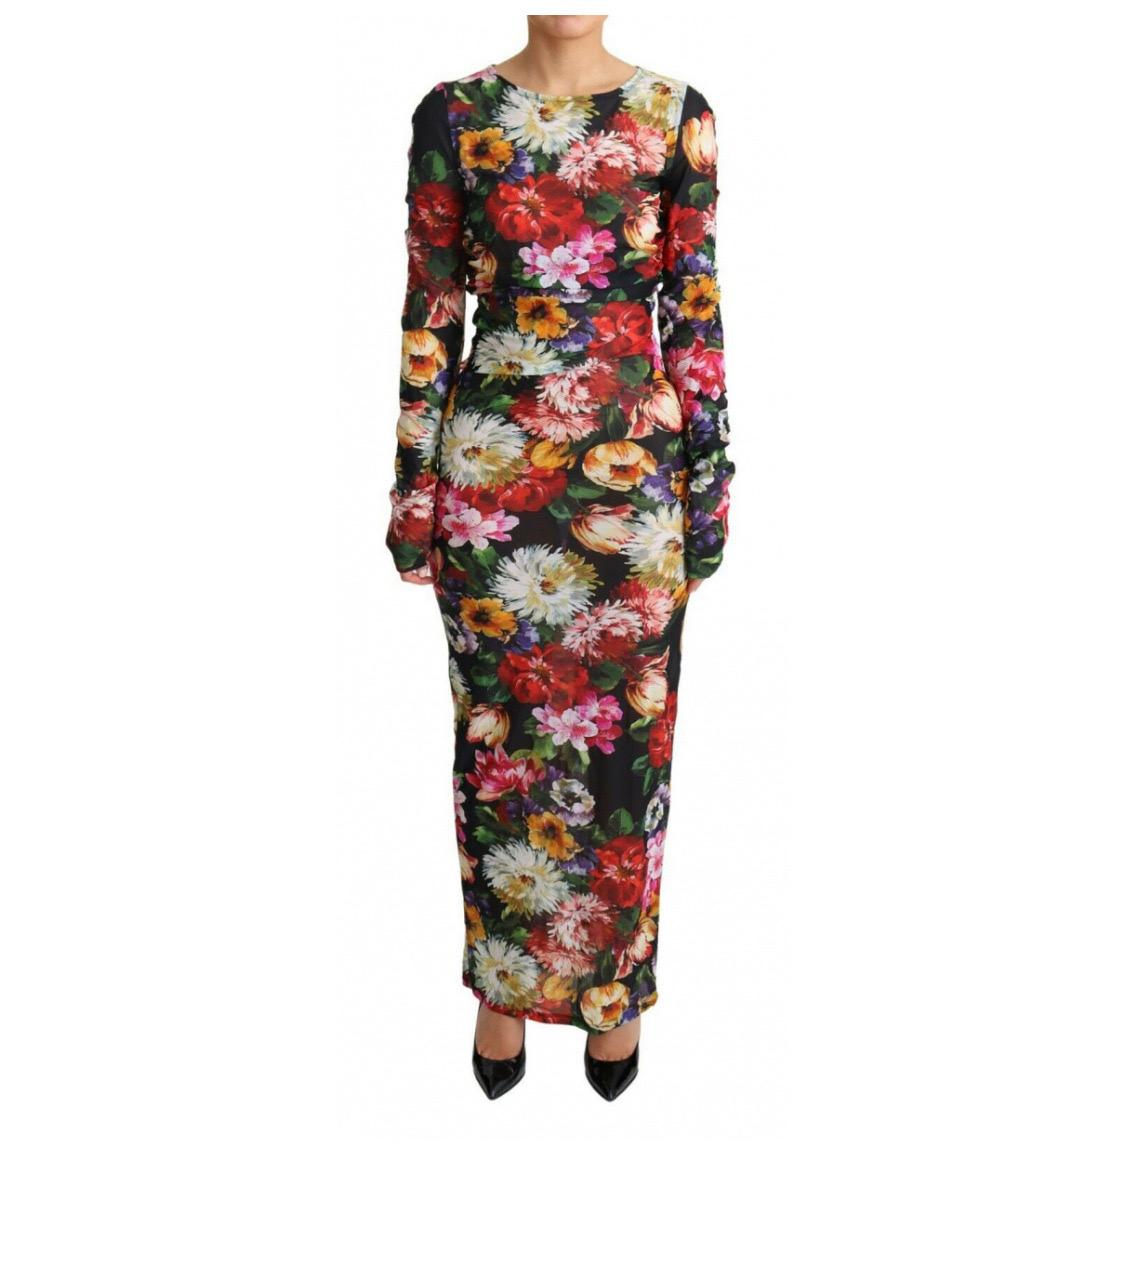 Dolce & Gabbana
Colorful sheer maxi multicolor floral dress 2